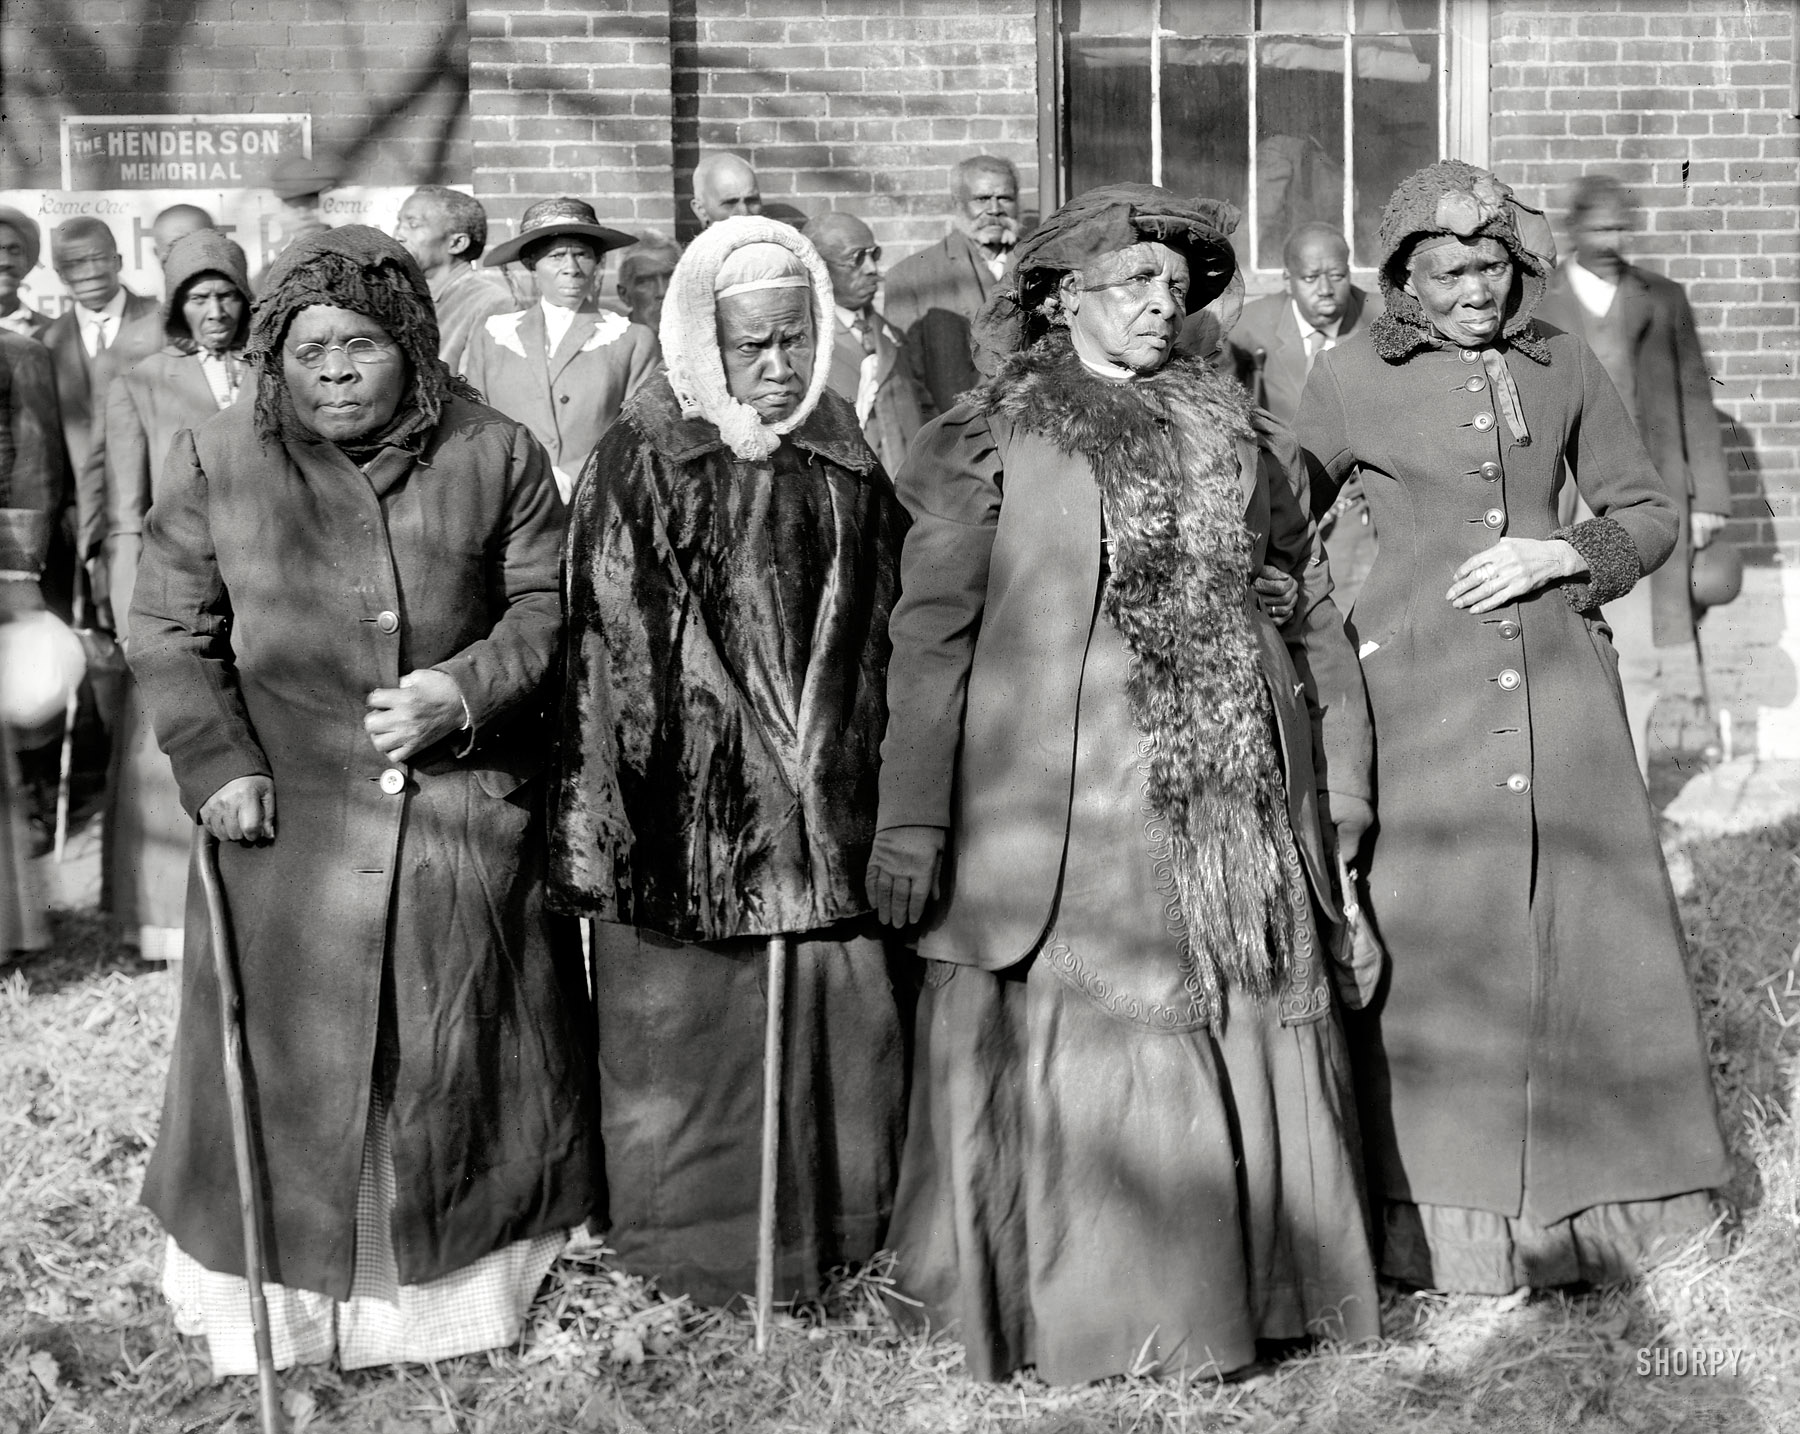 Washington, D.C., 1916. "Convention of former slaves. Annie Parram, age 104; Anna Angales, age 105; Elizabeth Berkeley, 125; Sadie Thompson, 110." National Photo Company Collection glass negative. View full size.